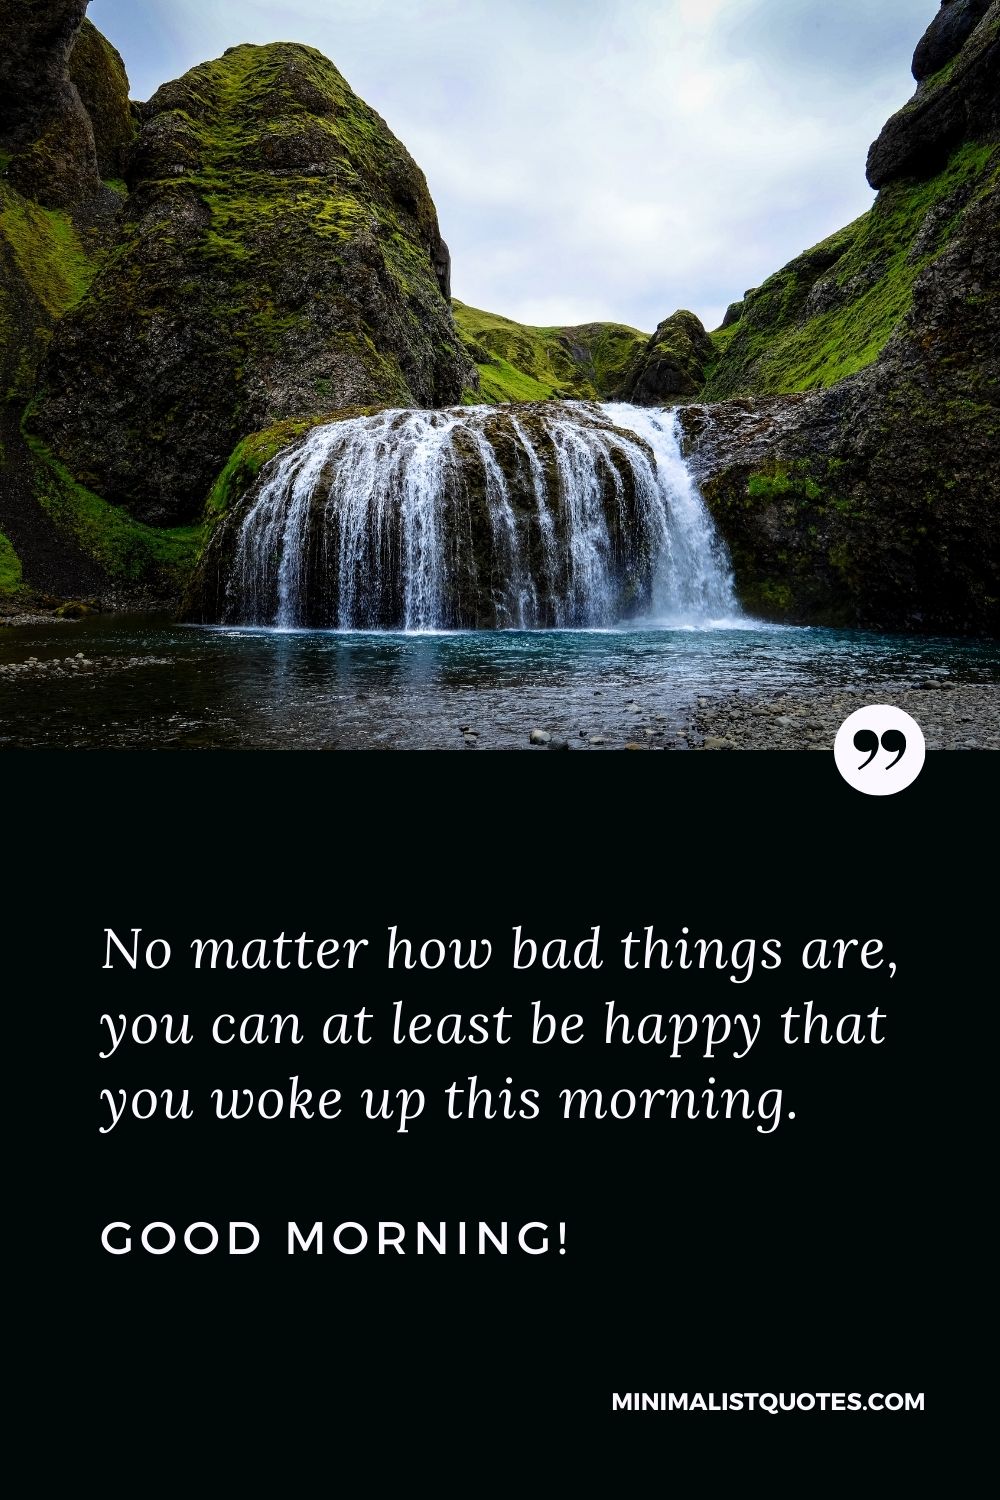 Morning Quote, Wish & Message: No matter how bad things are, you can at least be happy that you woke up this morning. Good Morning!